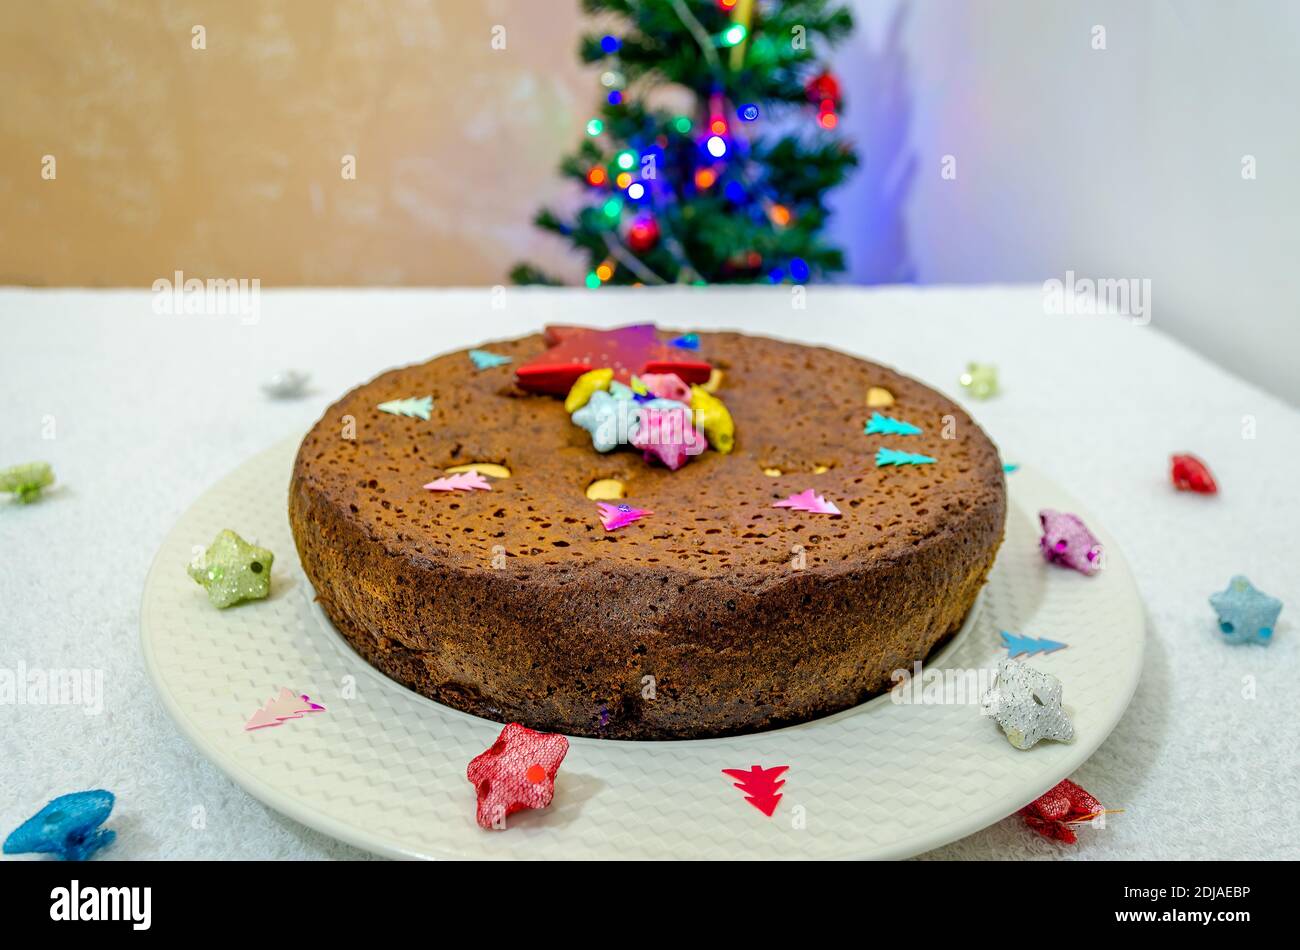 Christmas Special plum cake in a white plate with Christmas decorations and a Christmas tree in the background Stock Photo